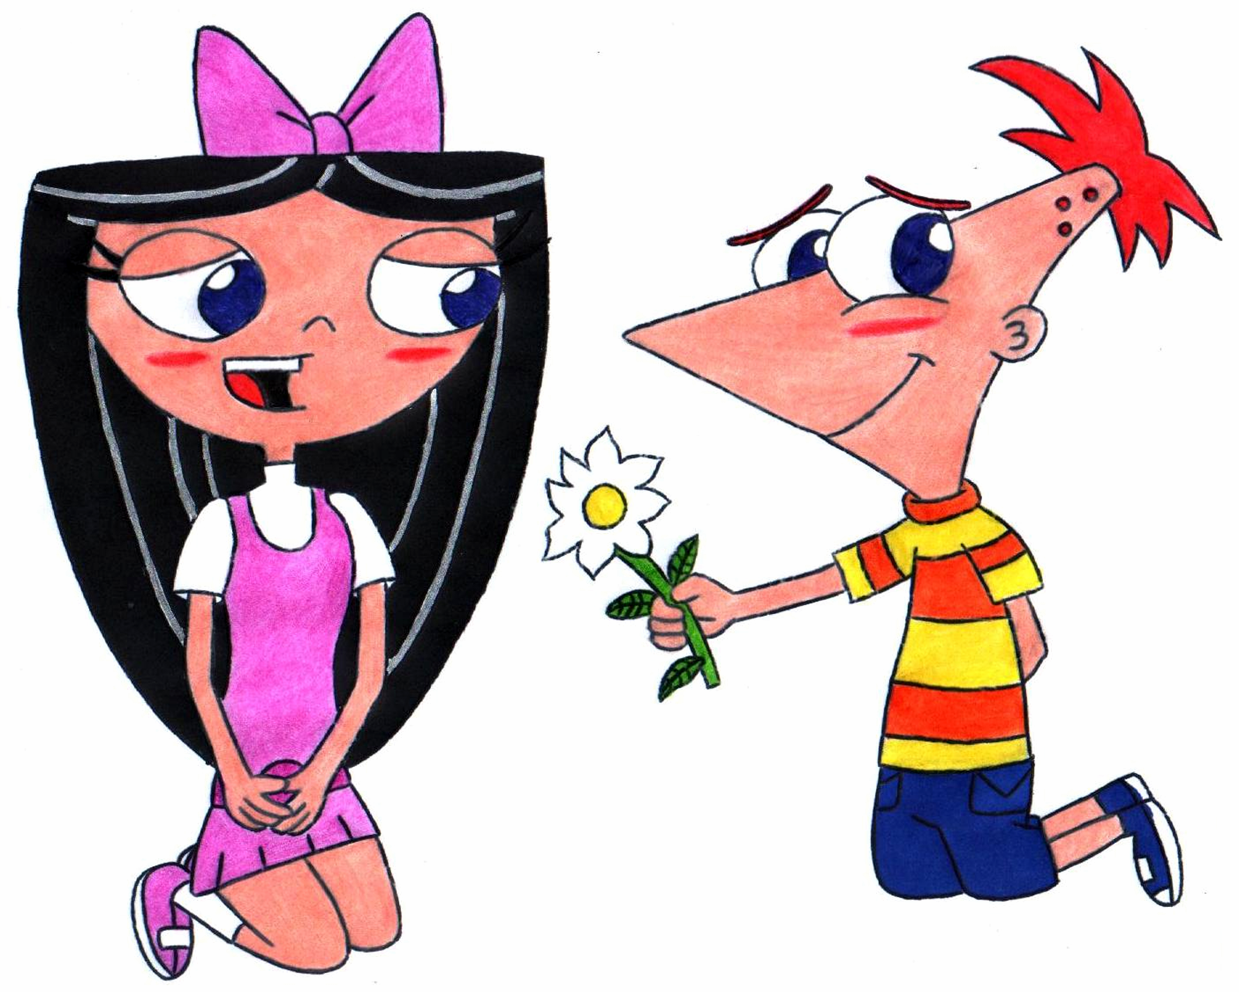 Phineas And Ferb By Artemisito On DeviantArt.